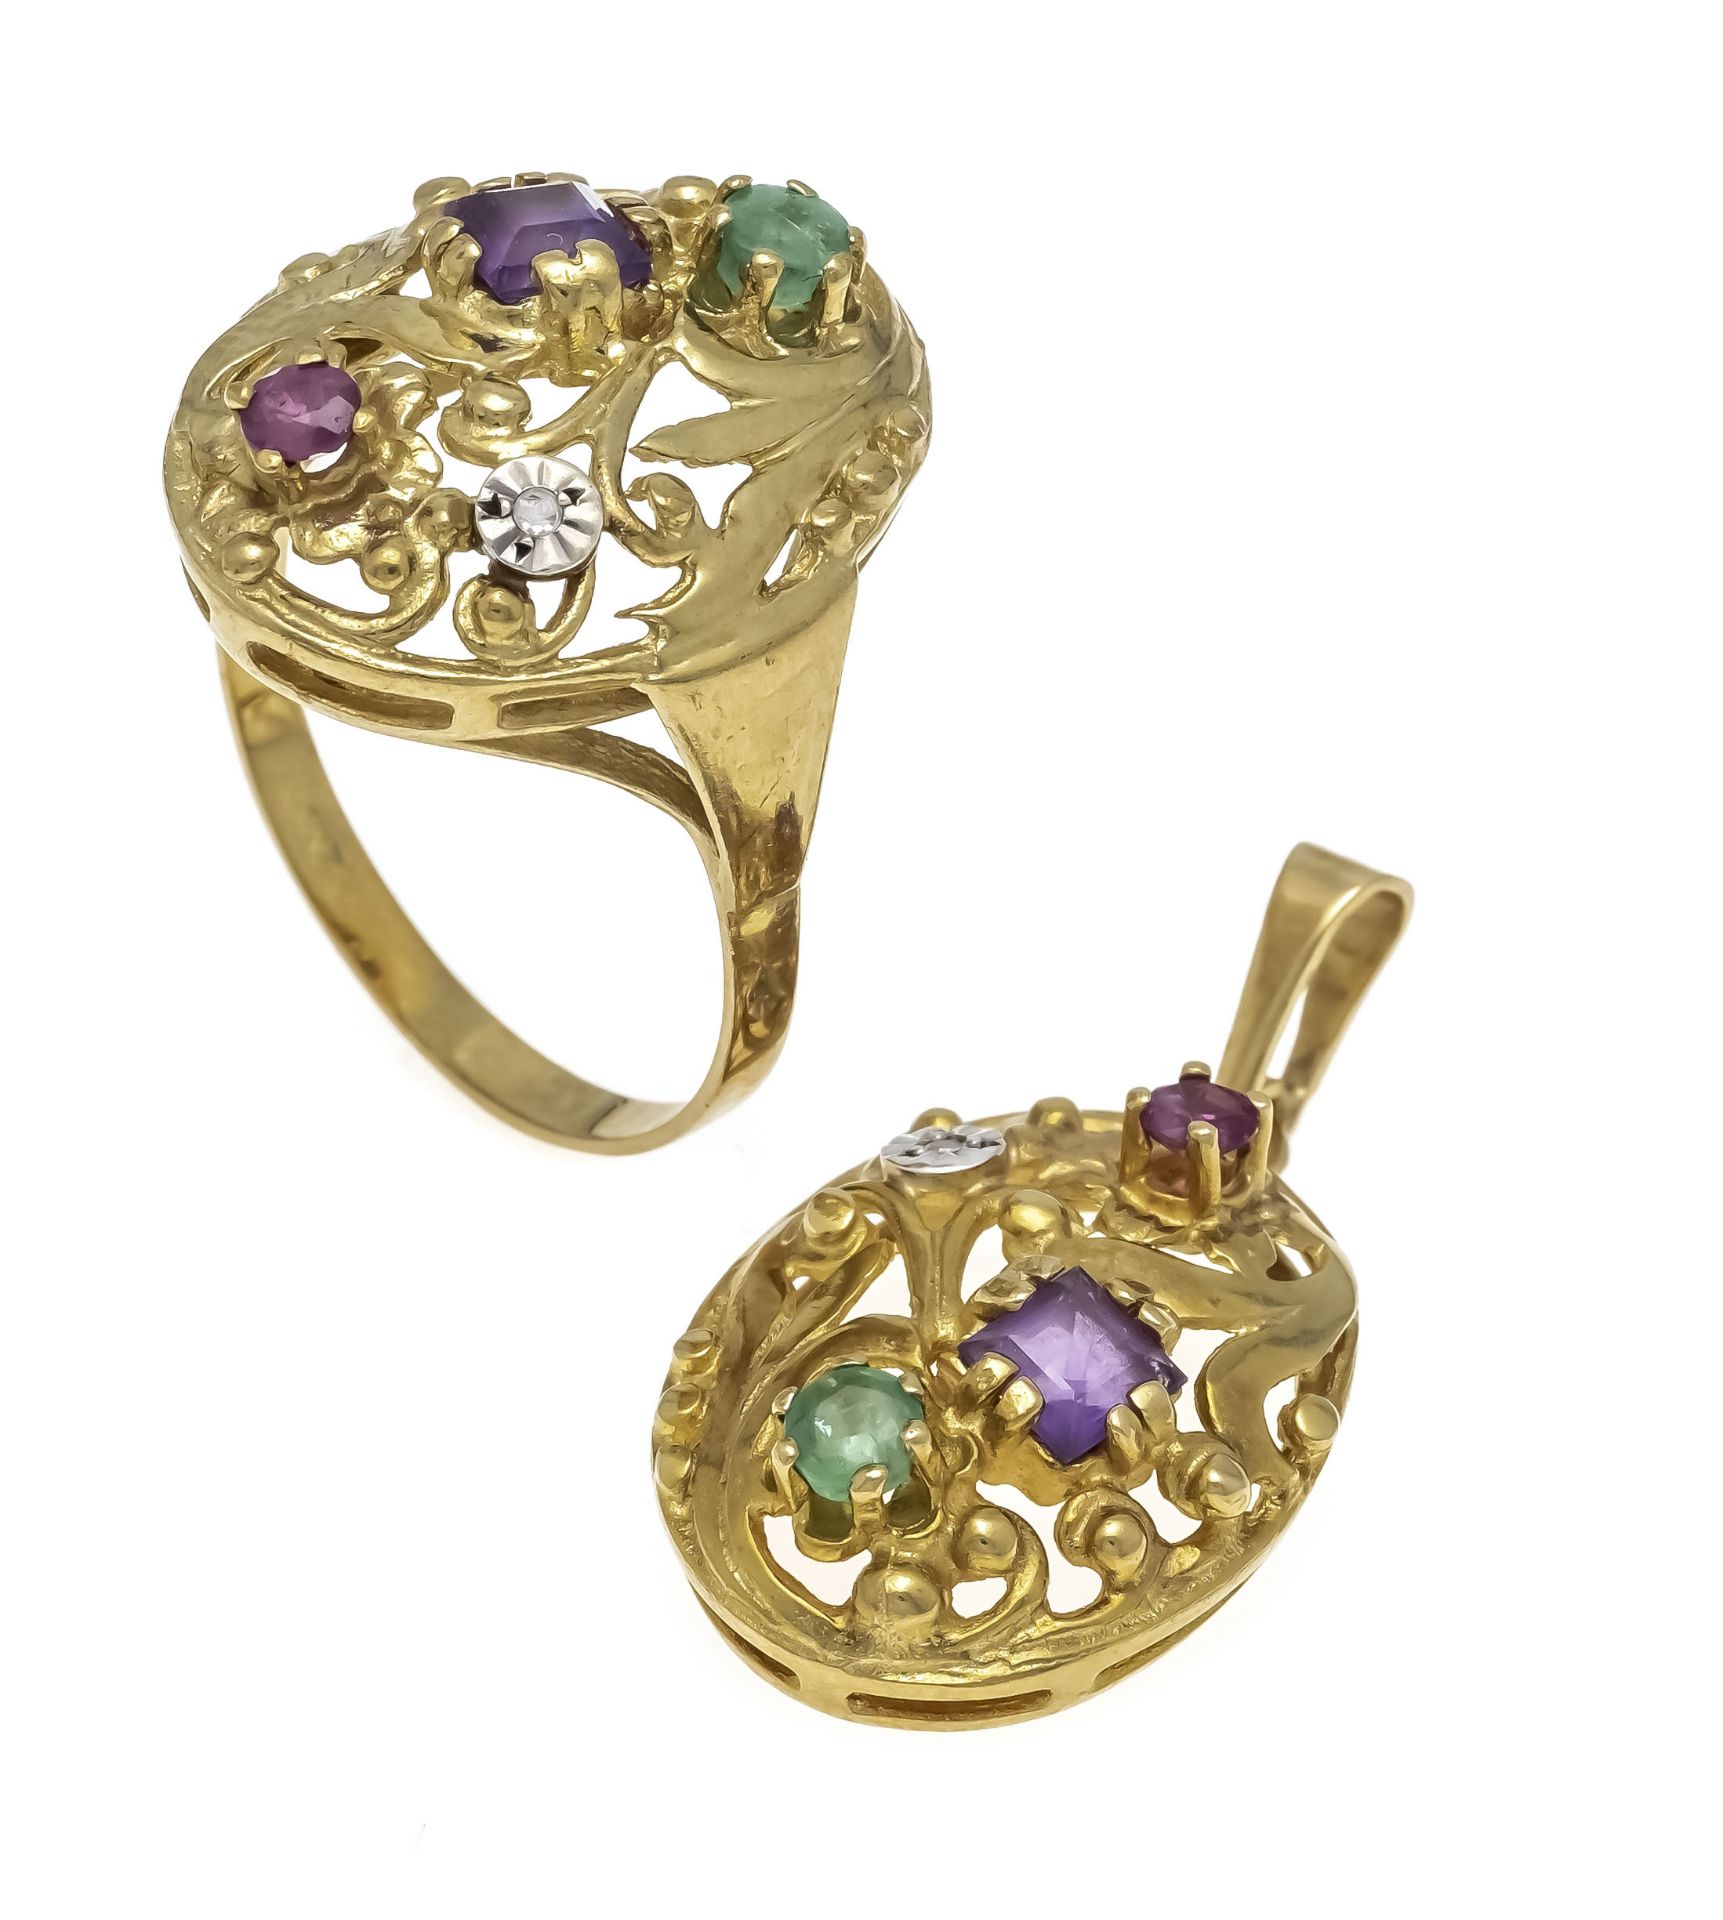 2-piece garden set 333/000 unstamped, tested, with different faceted amethysts, emeralds, rubies and